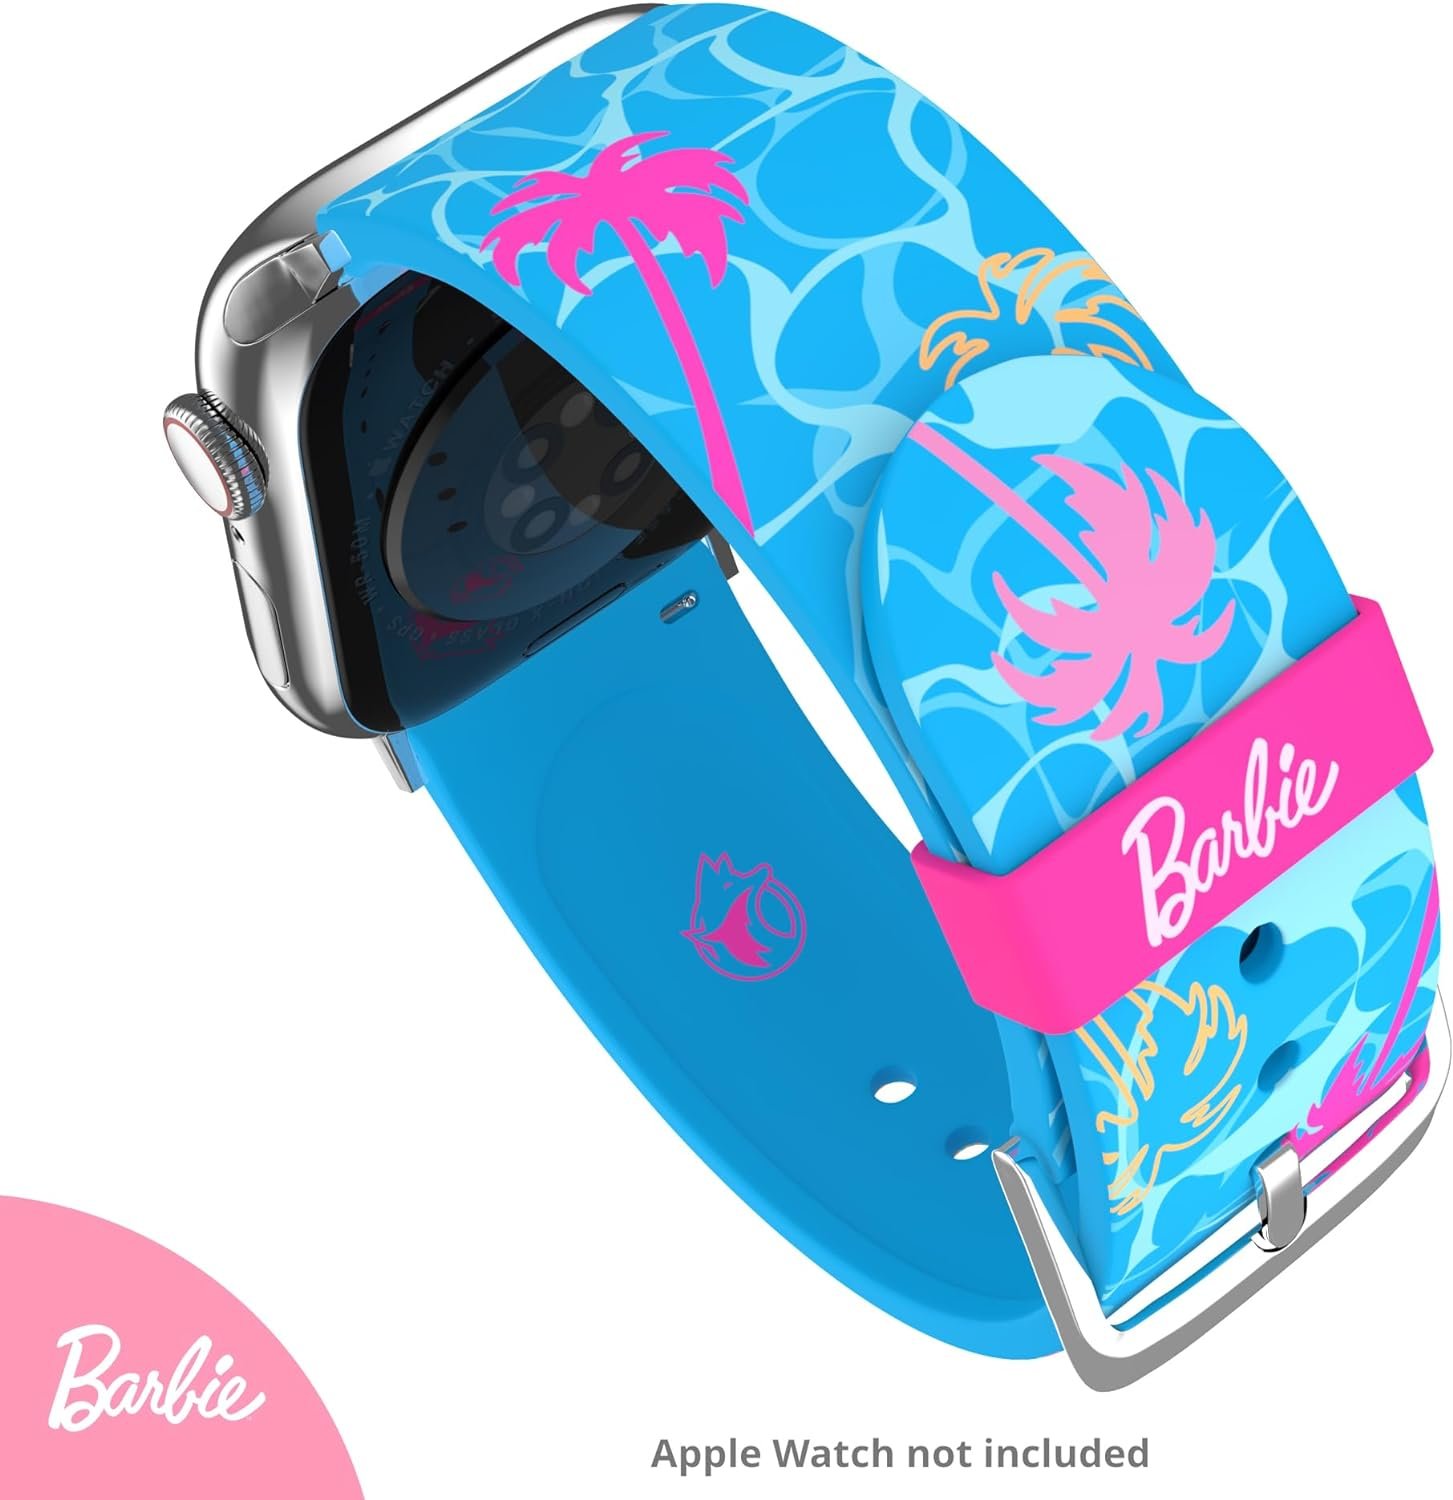 Barbie Smartwatch Band Compatible with Apple Watch – A Must-Have Review